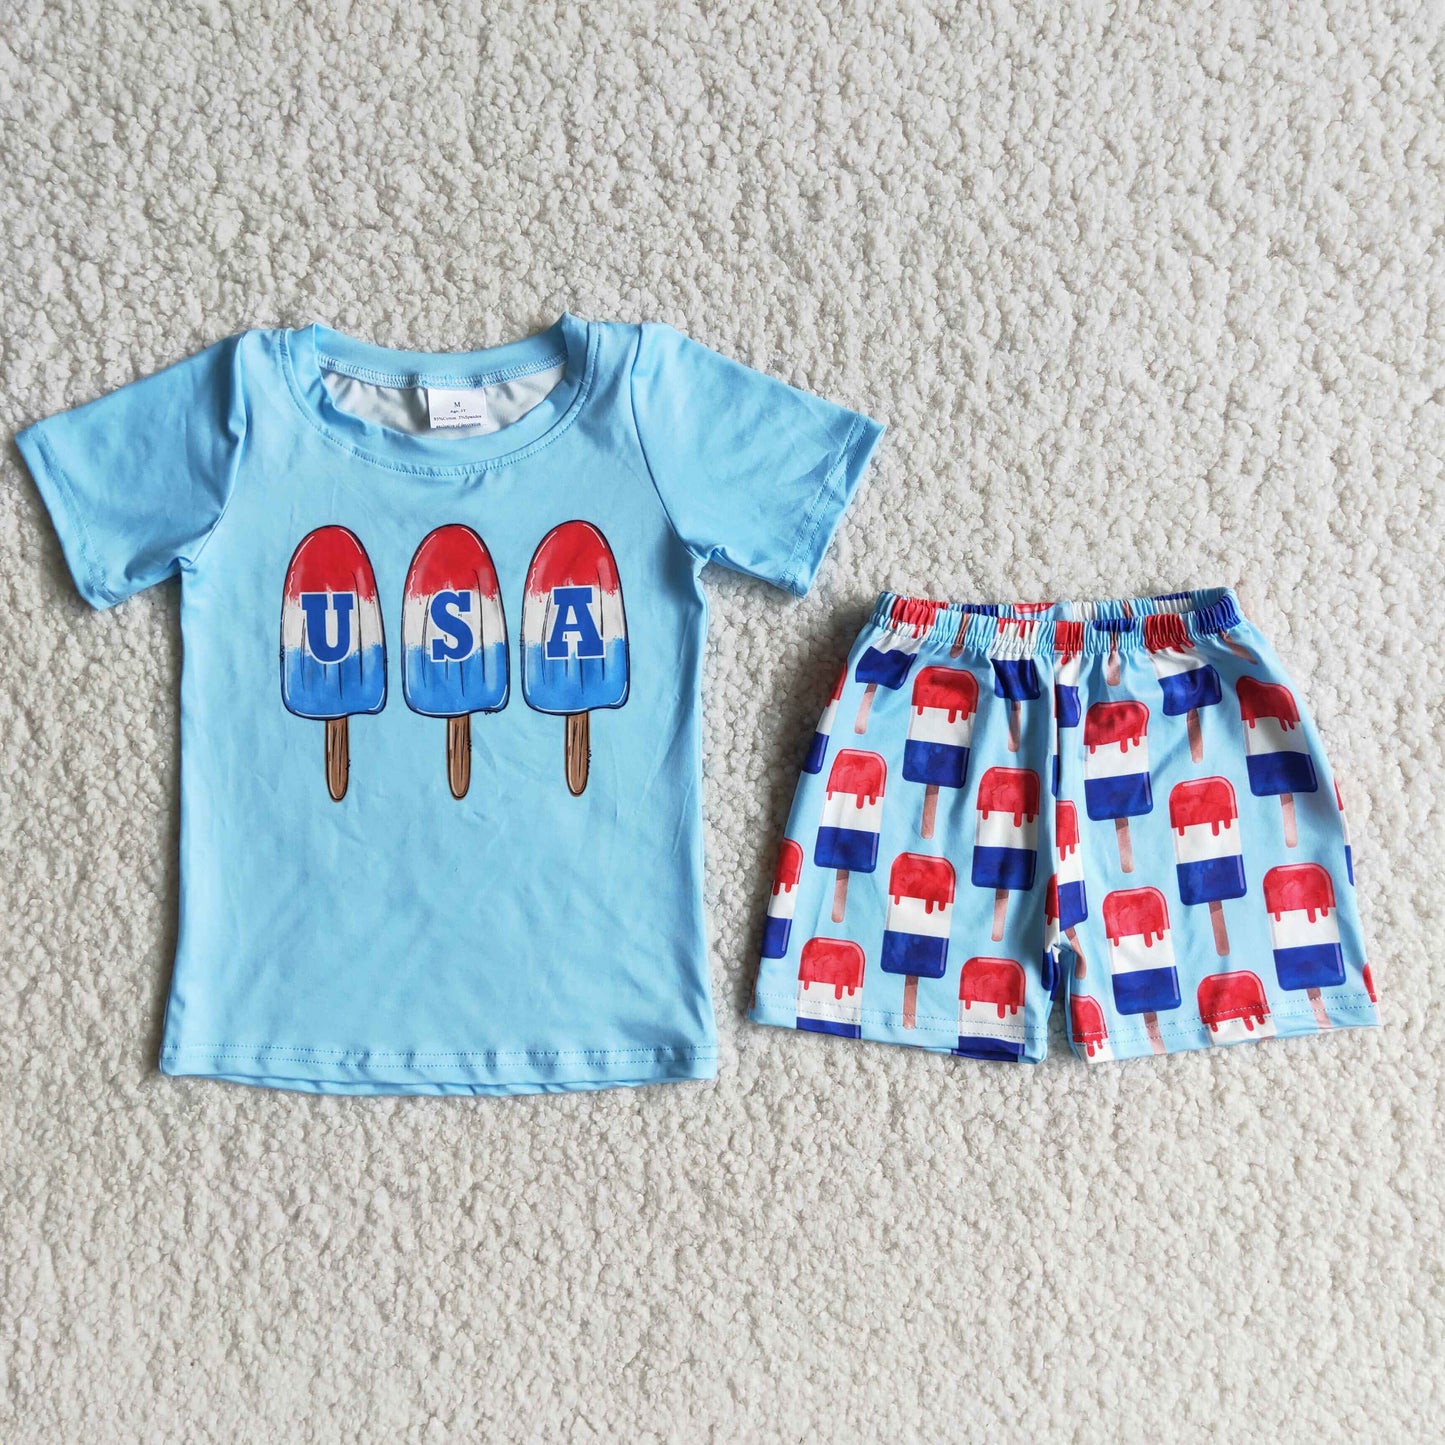 USA Popsicle Shorts Boys' 4th of July Outfit